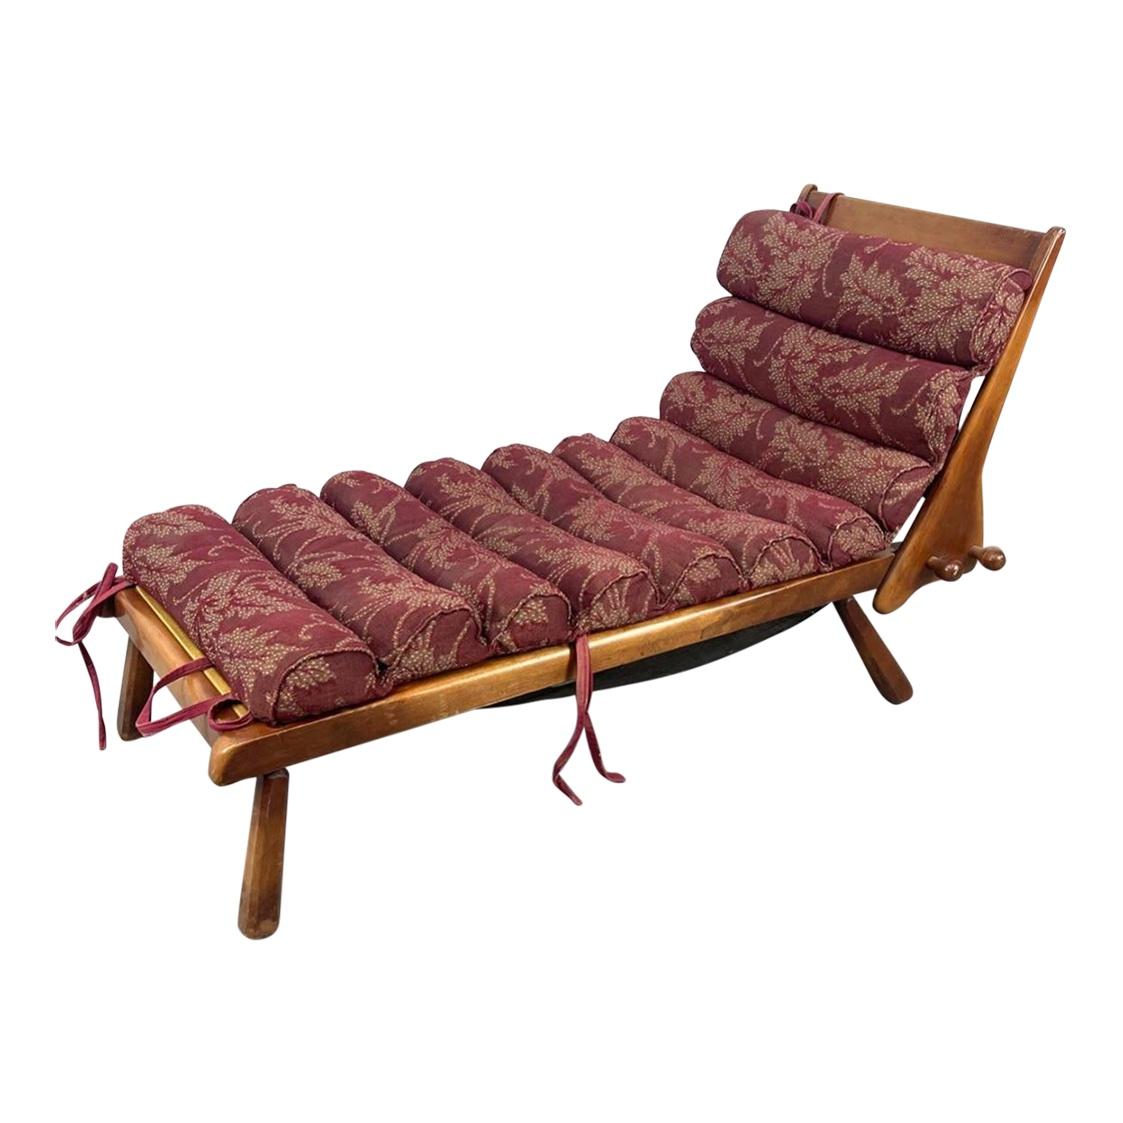 H.T. Cushman Manufacturing Company Chaise Longues